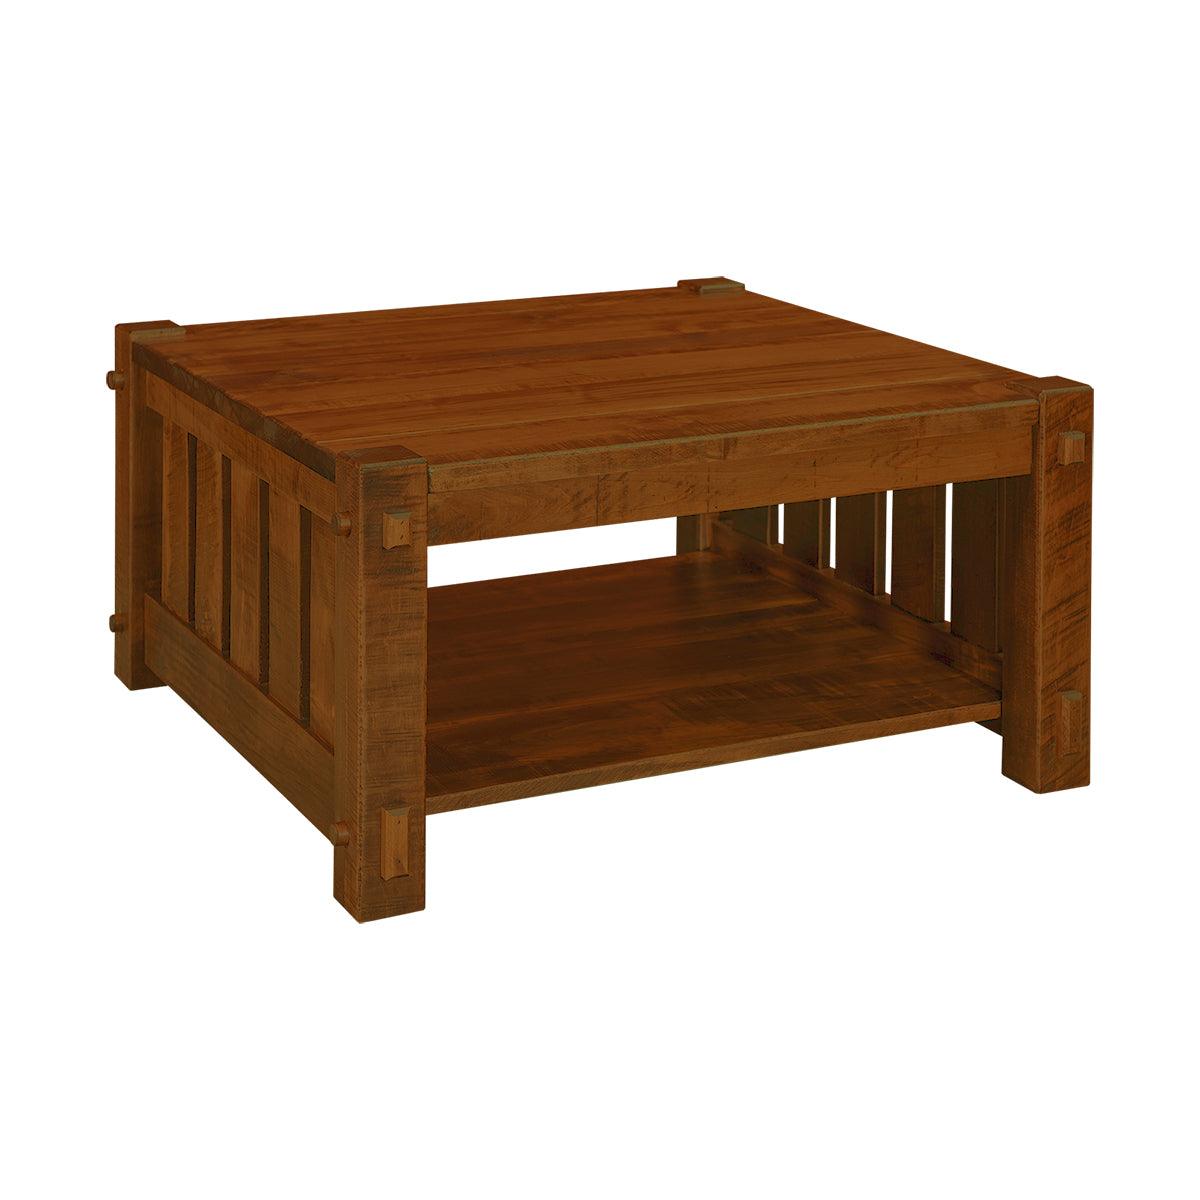 Mountain Roughsawn Square Wood Coffee Table